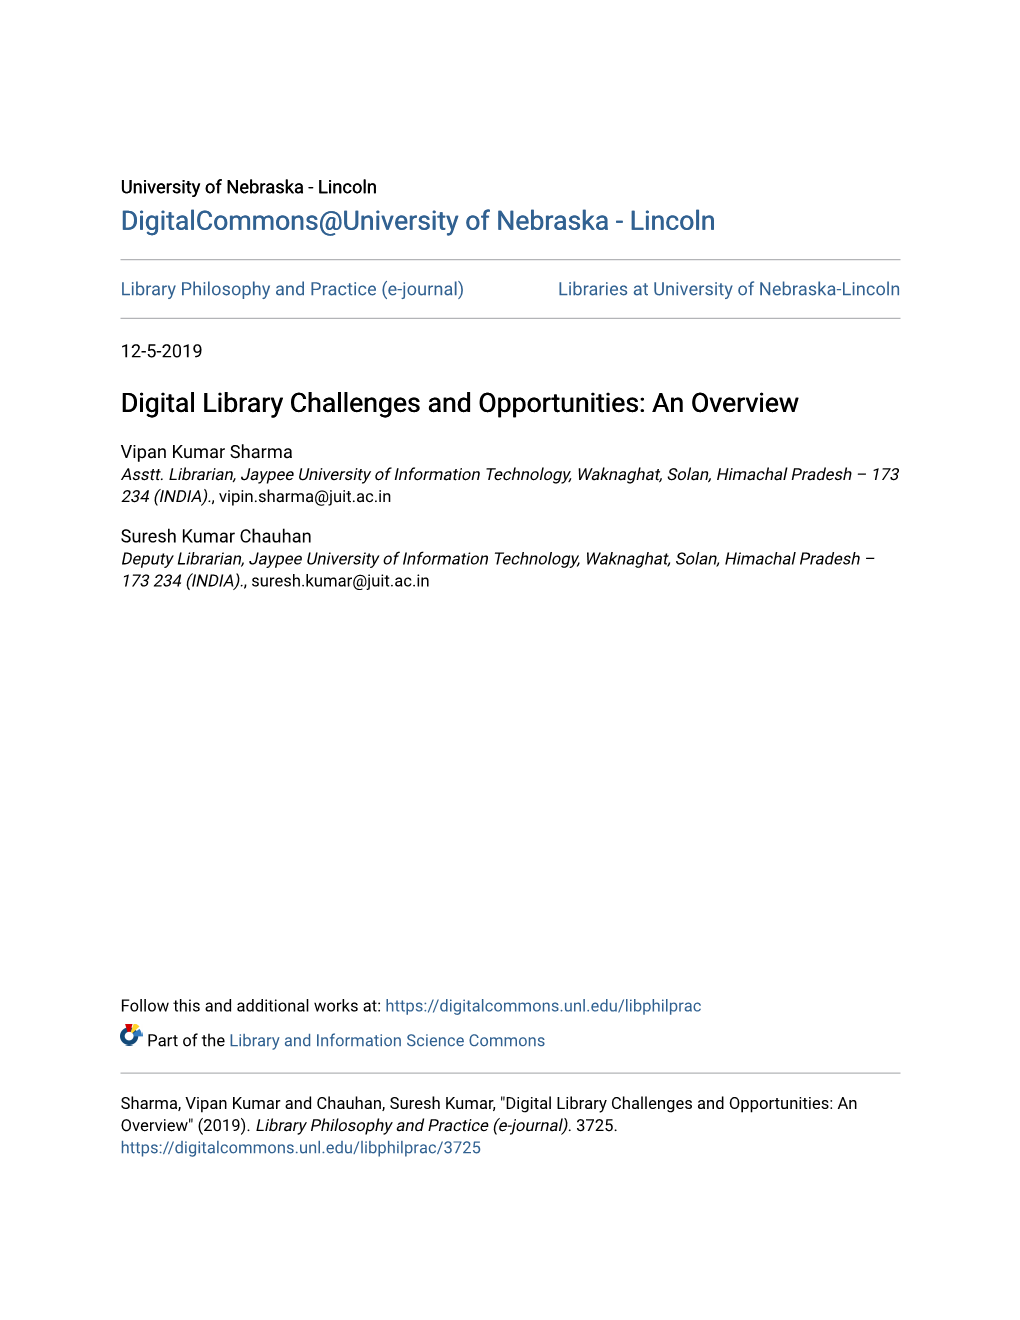 Digital Library Challenges and Opportunities: an Overview